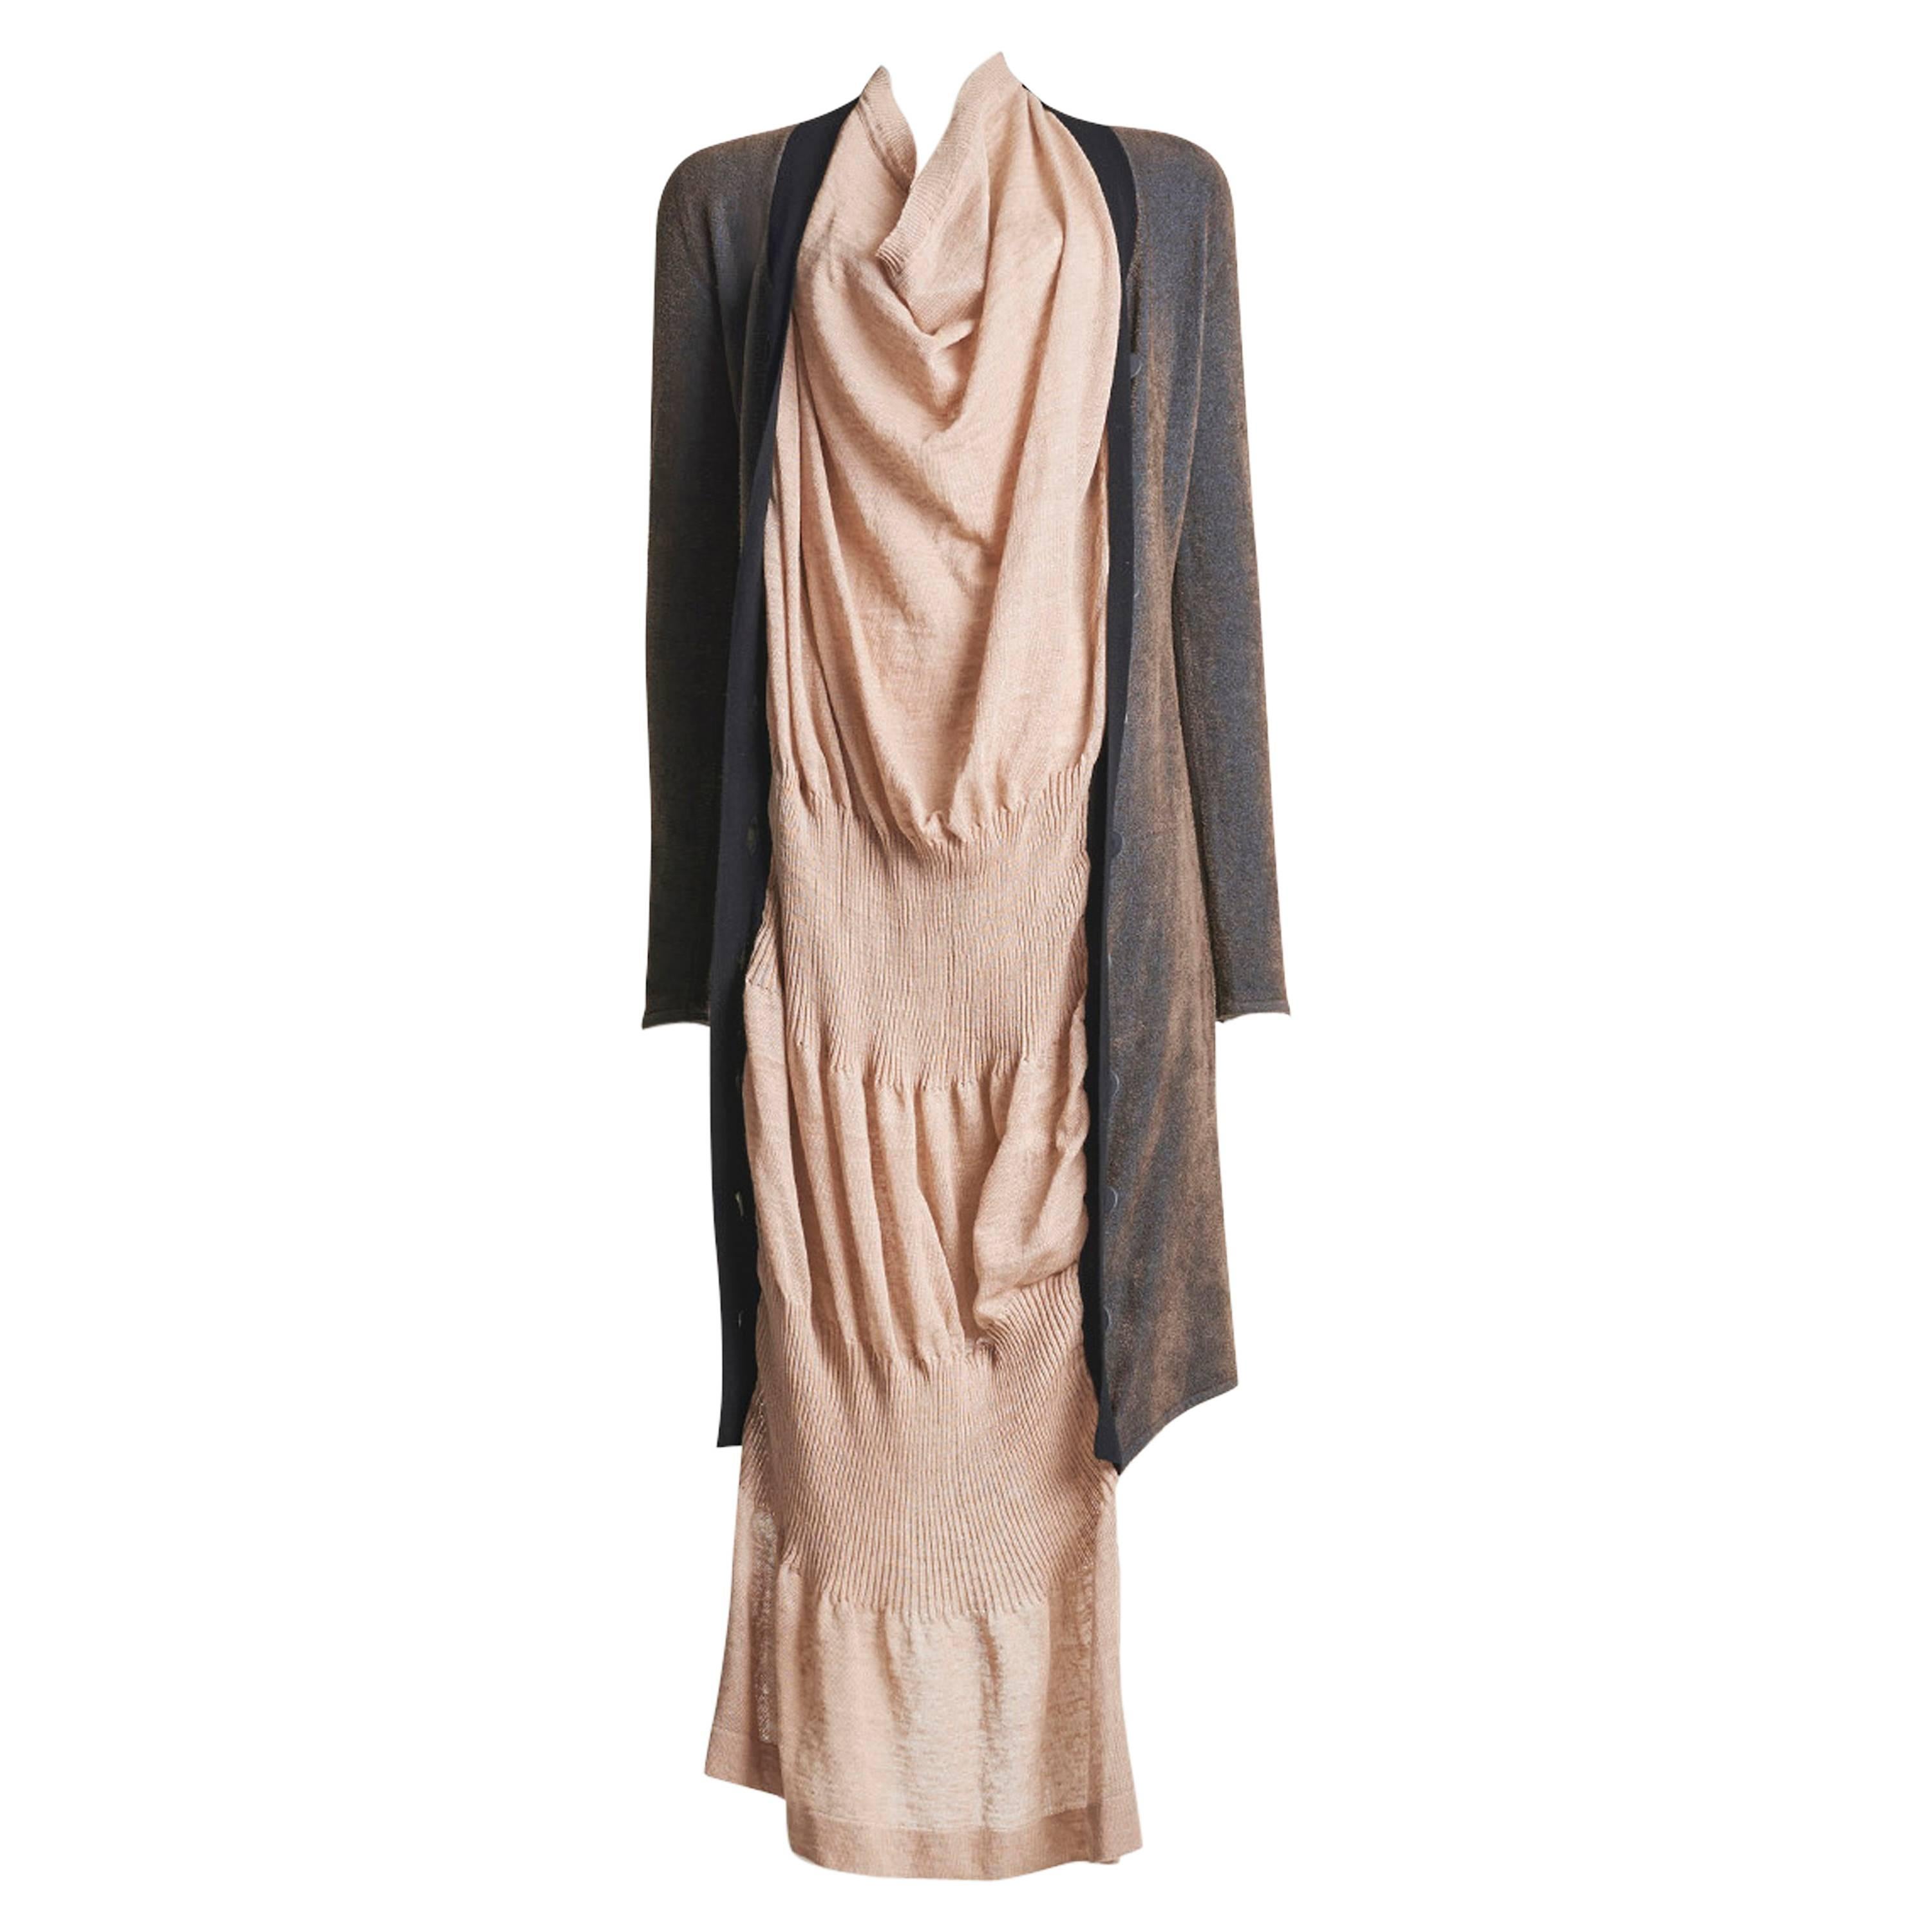 Vivienne Westwood Gold Label Two Tone Cardigan Dress For Sale